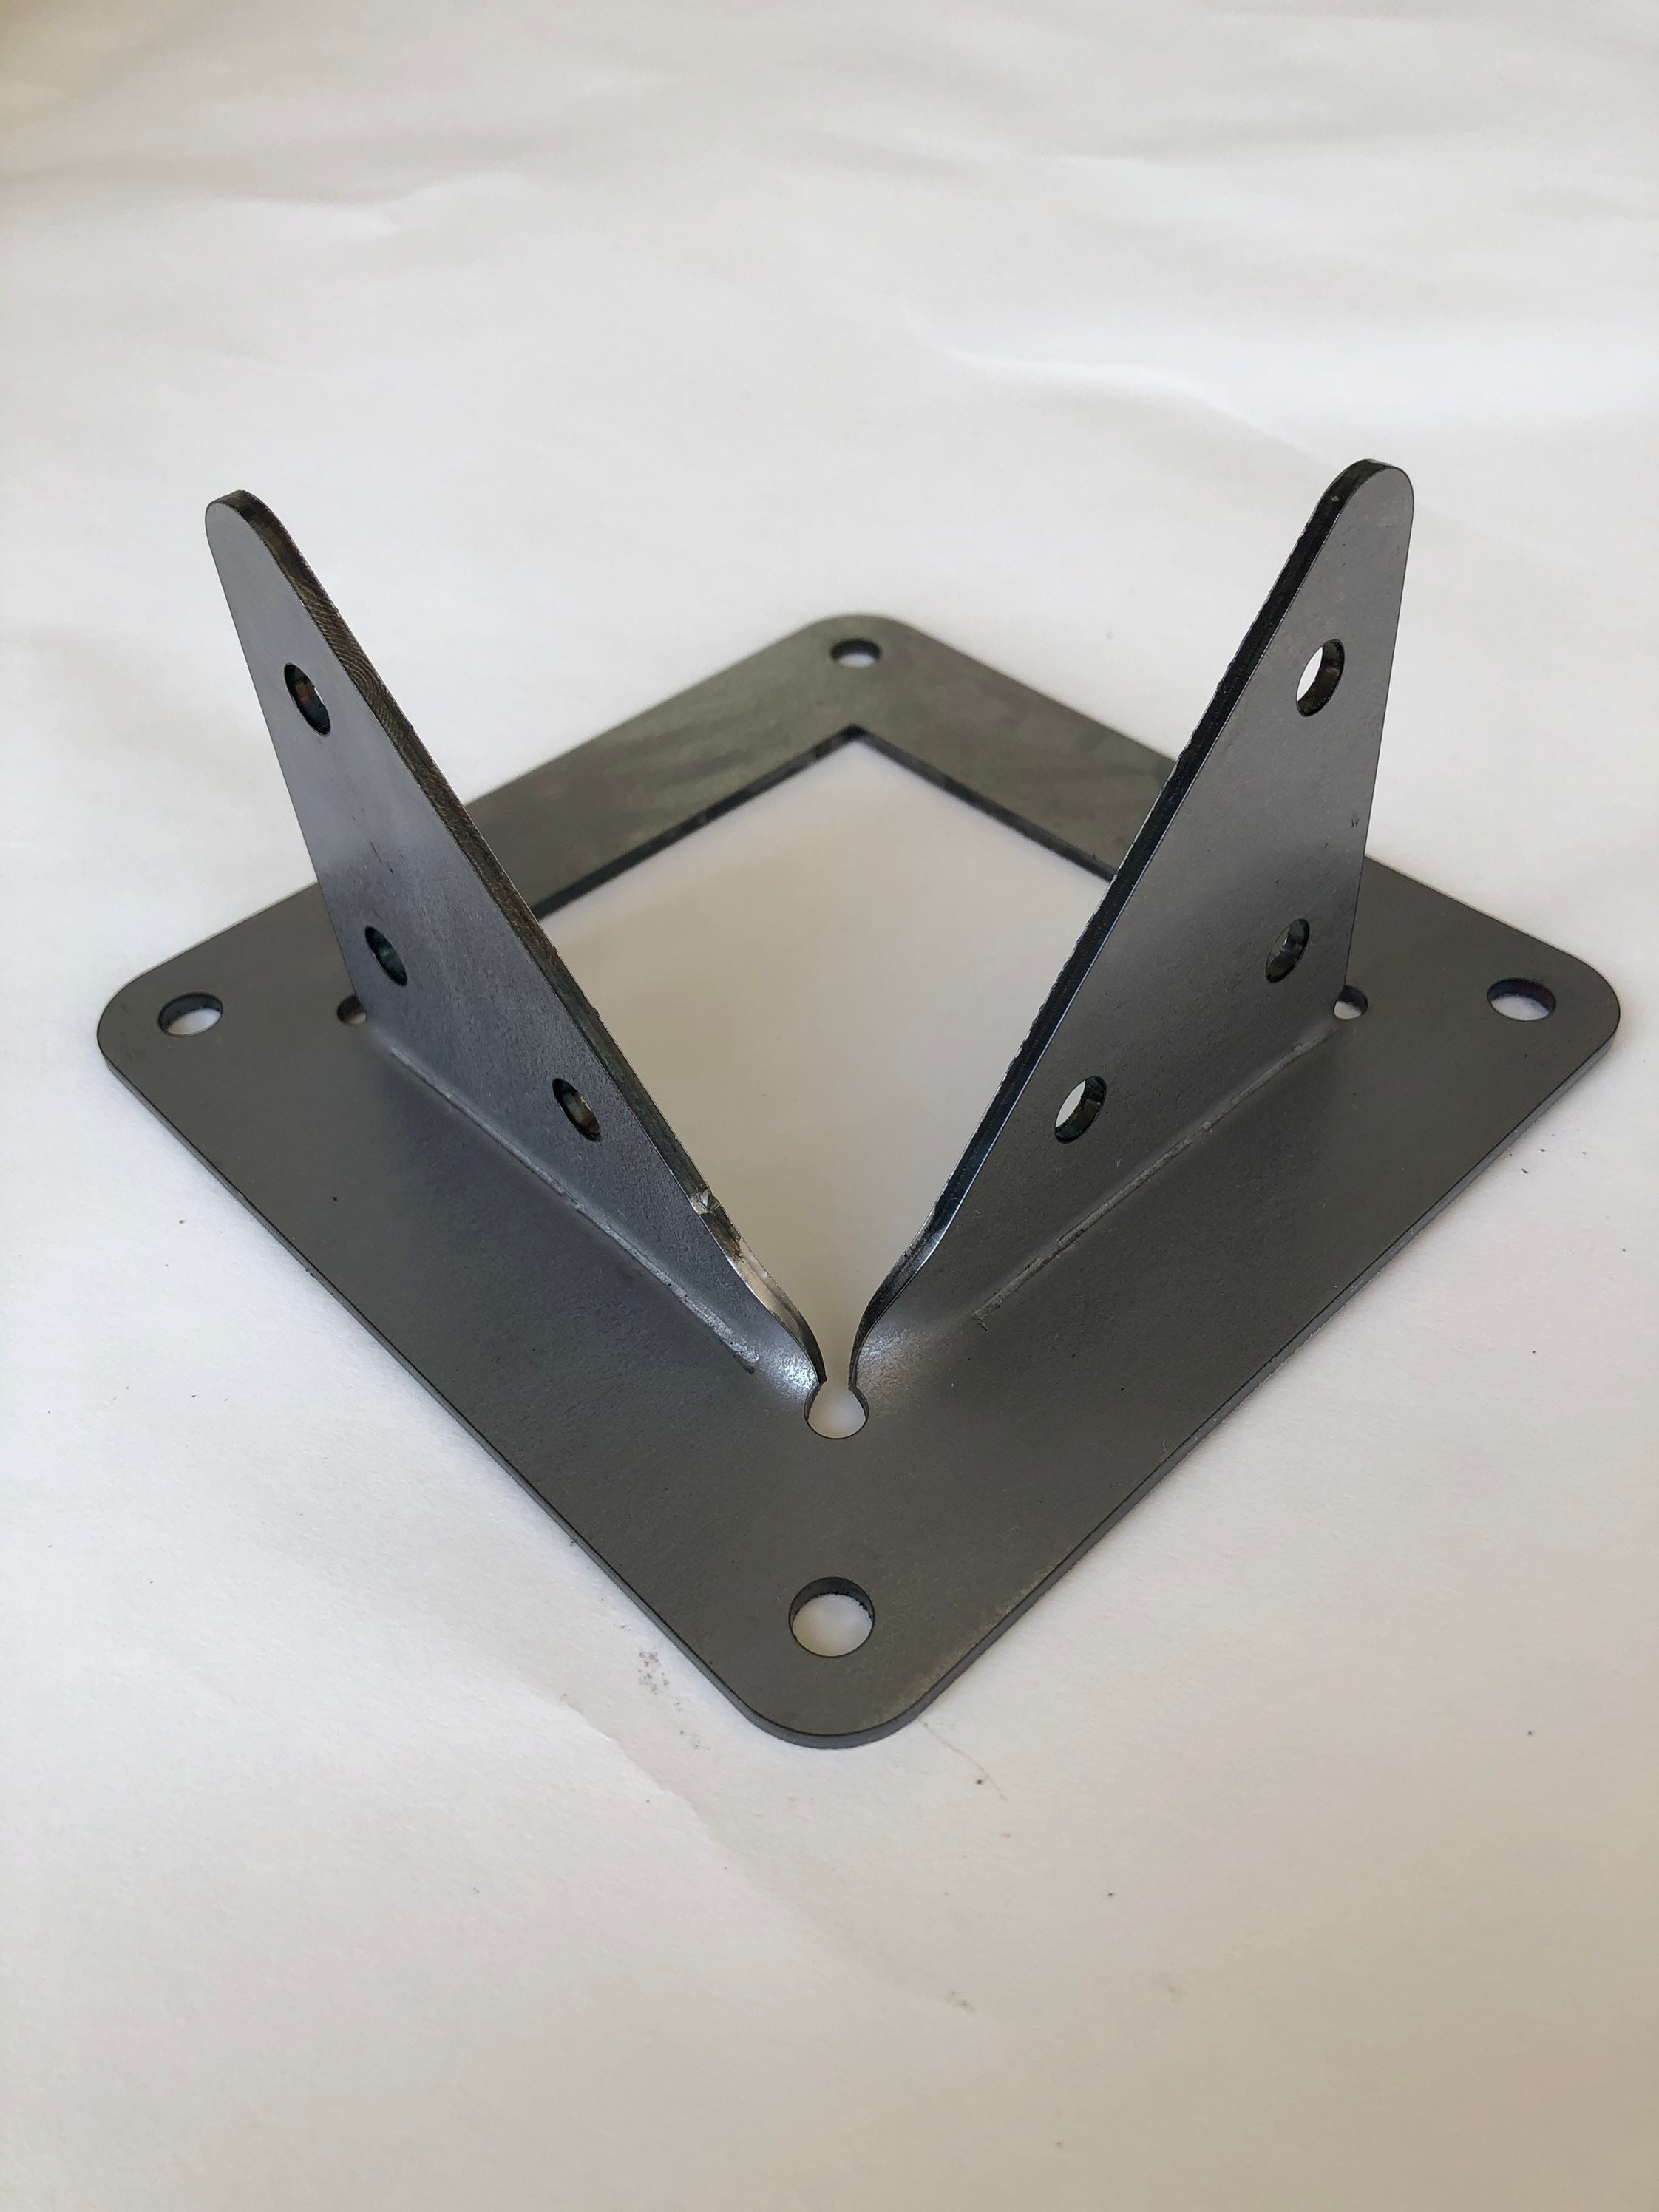 Buy Foot/base Mount for 4x4 Post Online in India 